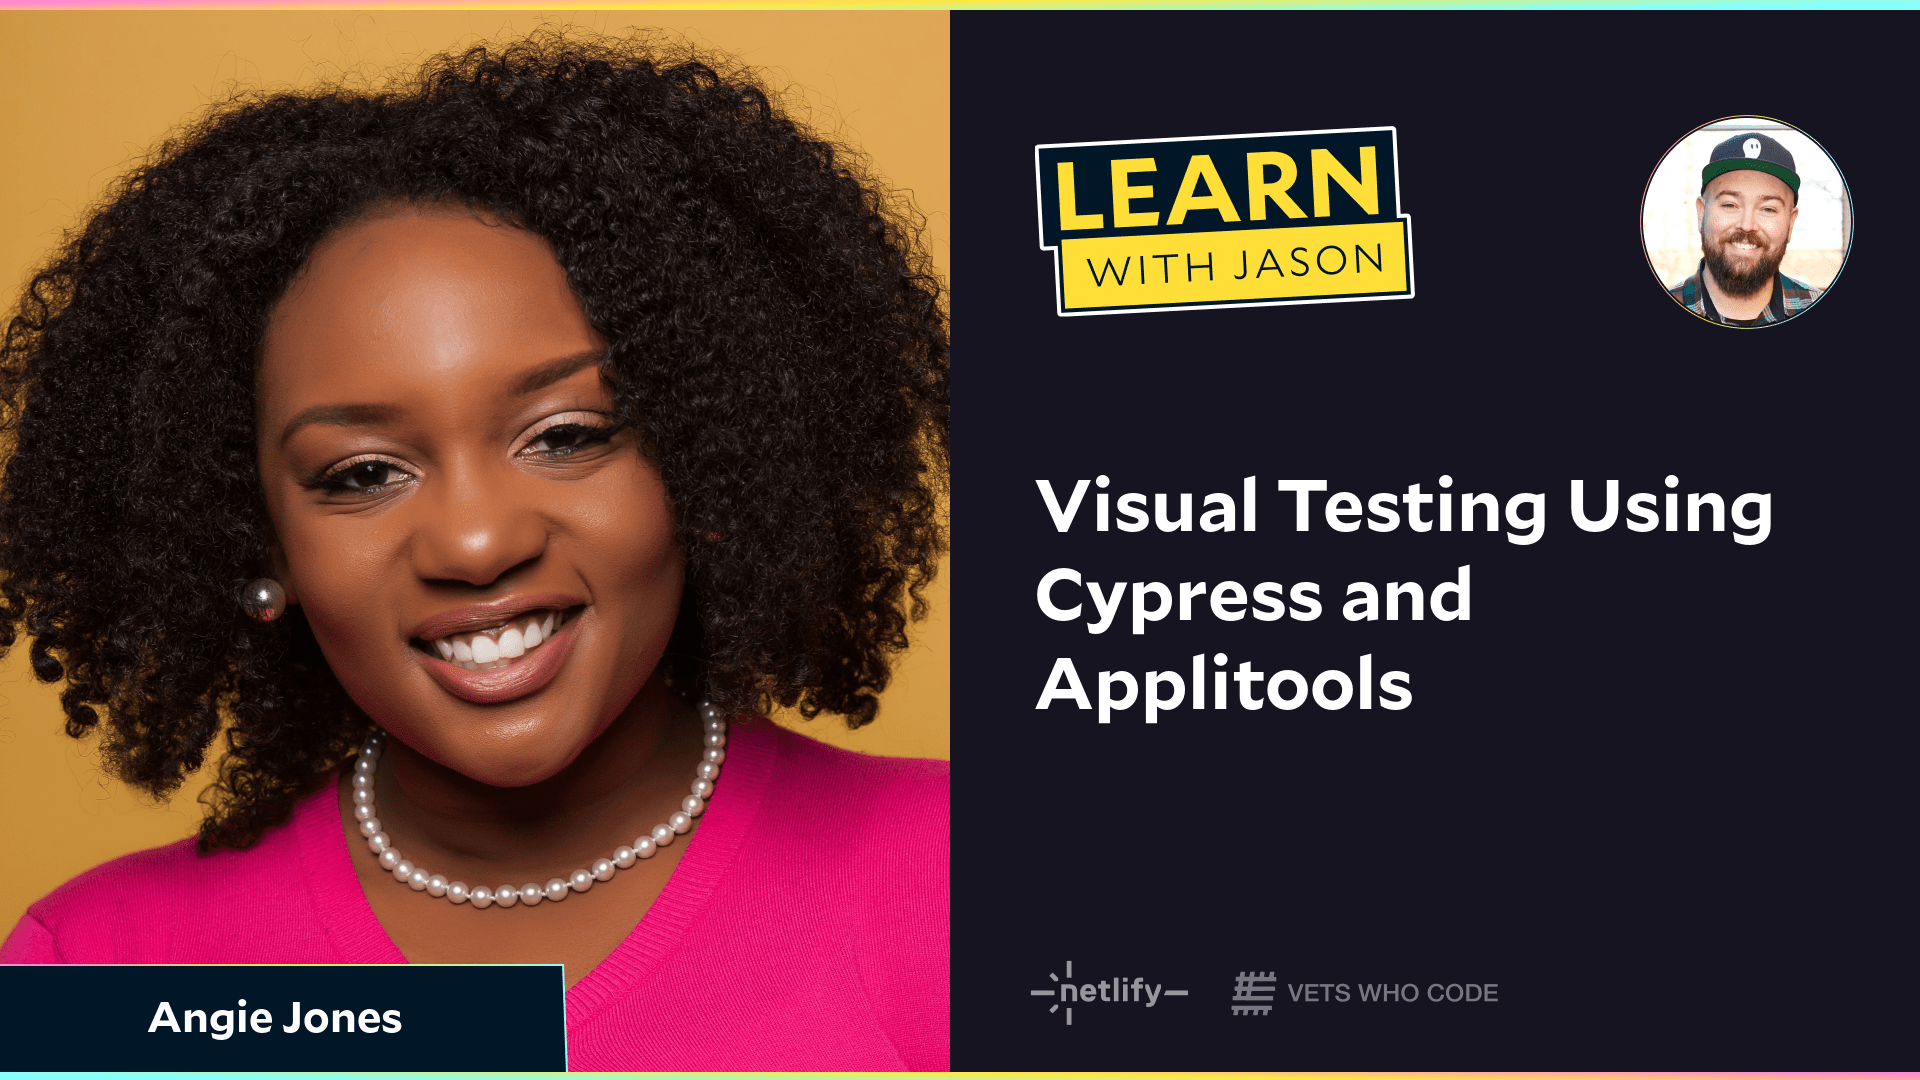 Visual Testing Using Cypress and Applitools (with Angie Jones)